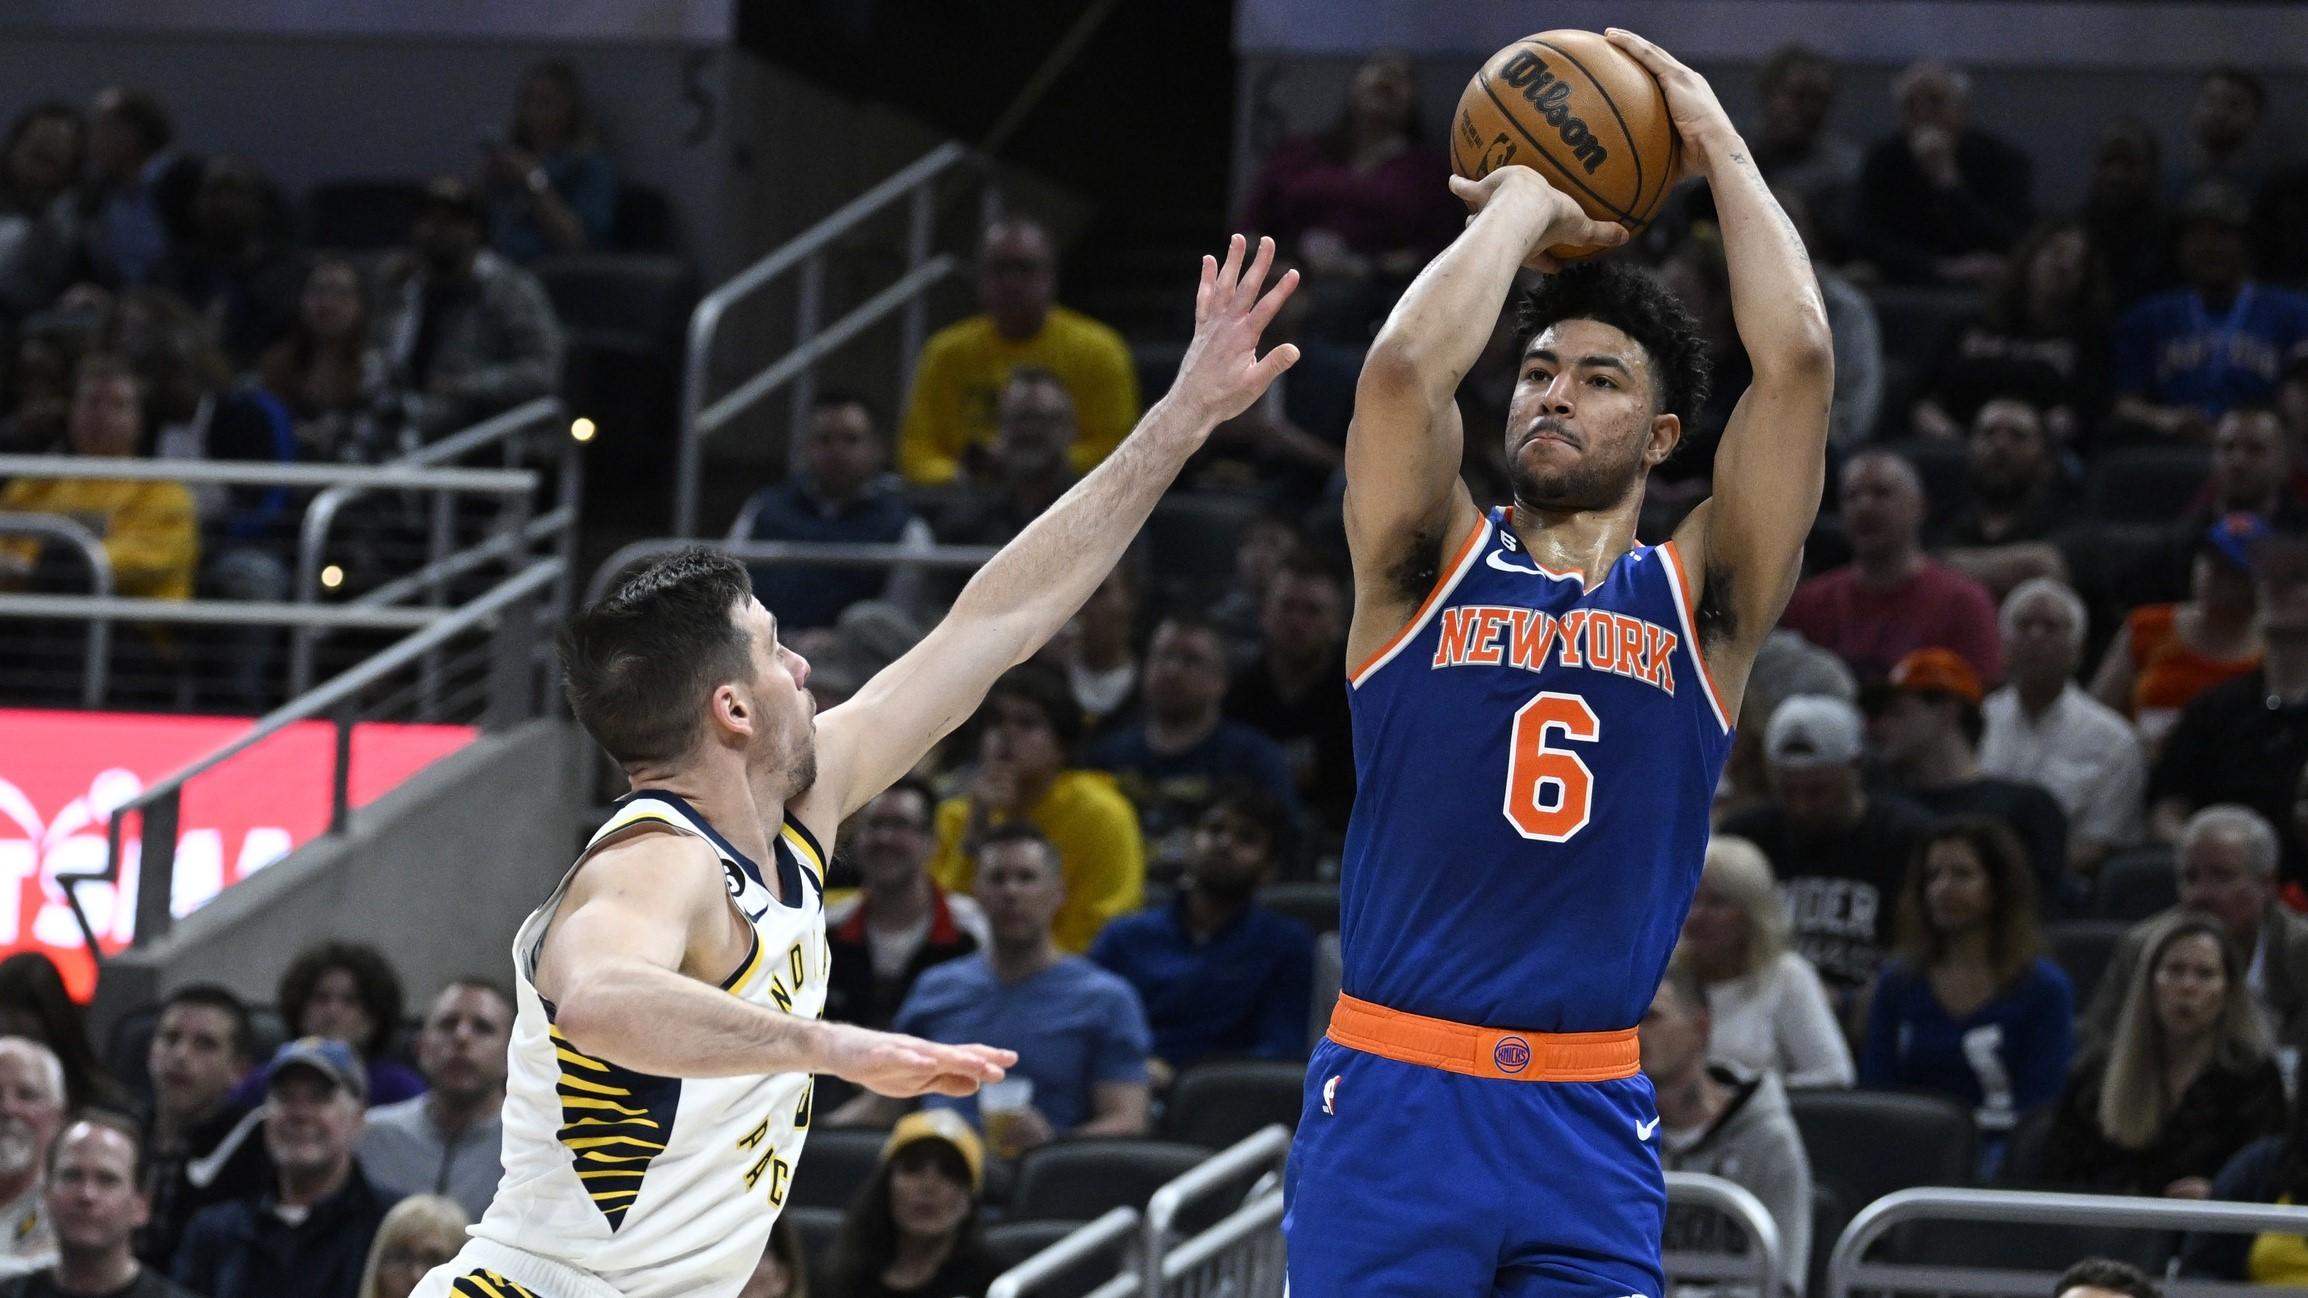 Apr 5, 2023; Indianapolis, Indiana, USA; New York Knicks guard Quentin Grimes (6) shoots over Indiana Pacers guard T.J. McConnell (9) during the first half at Gainbridge Fieldhouse. / Marc Lebryk-USA TODAY Sports